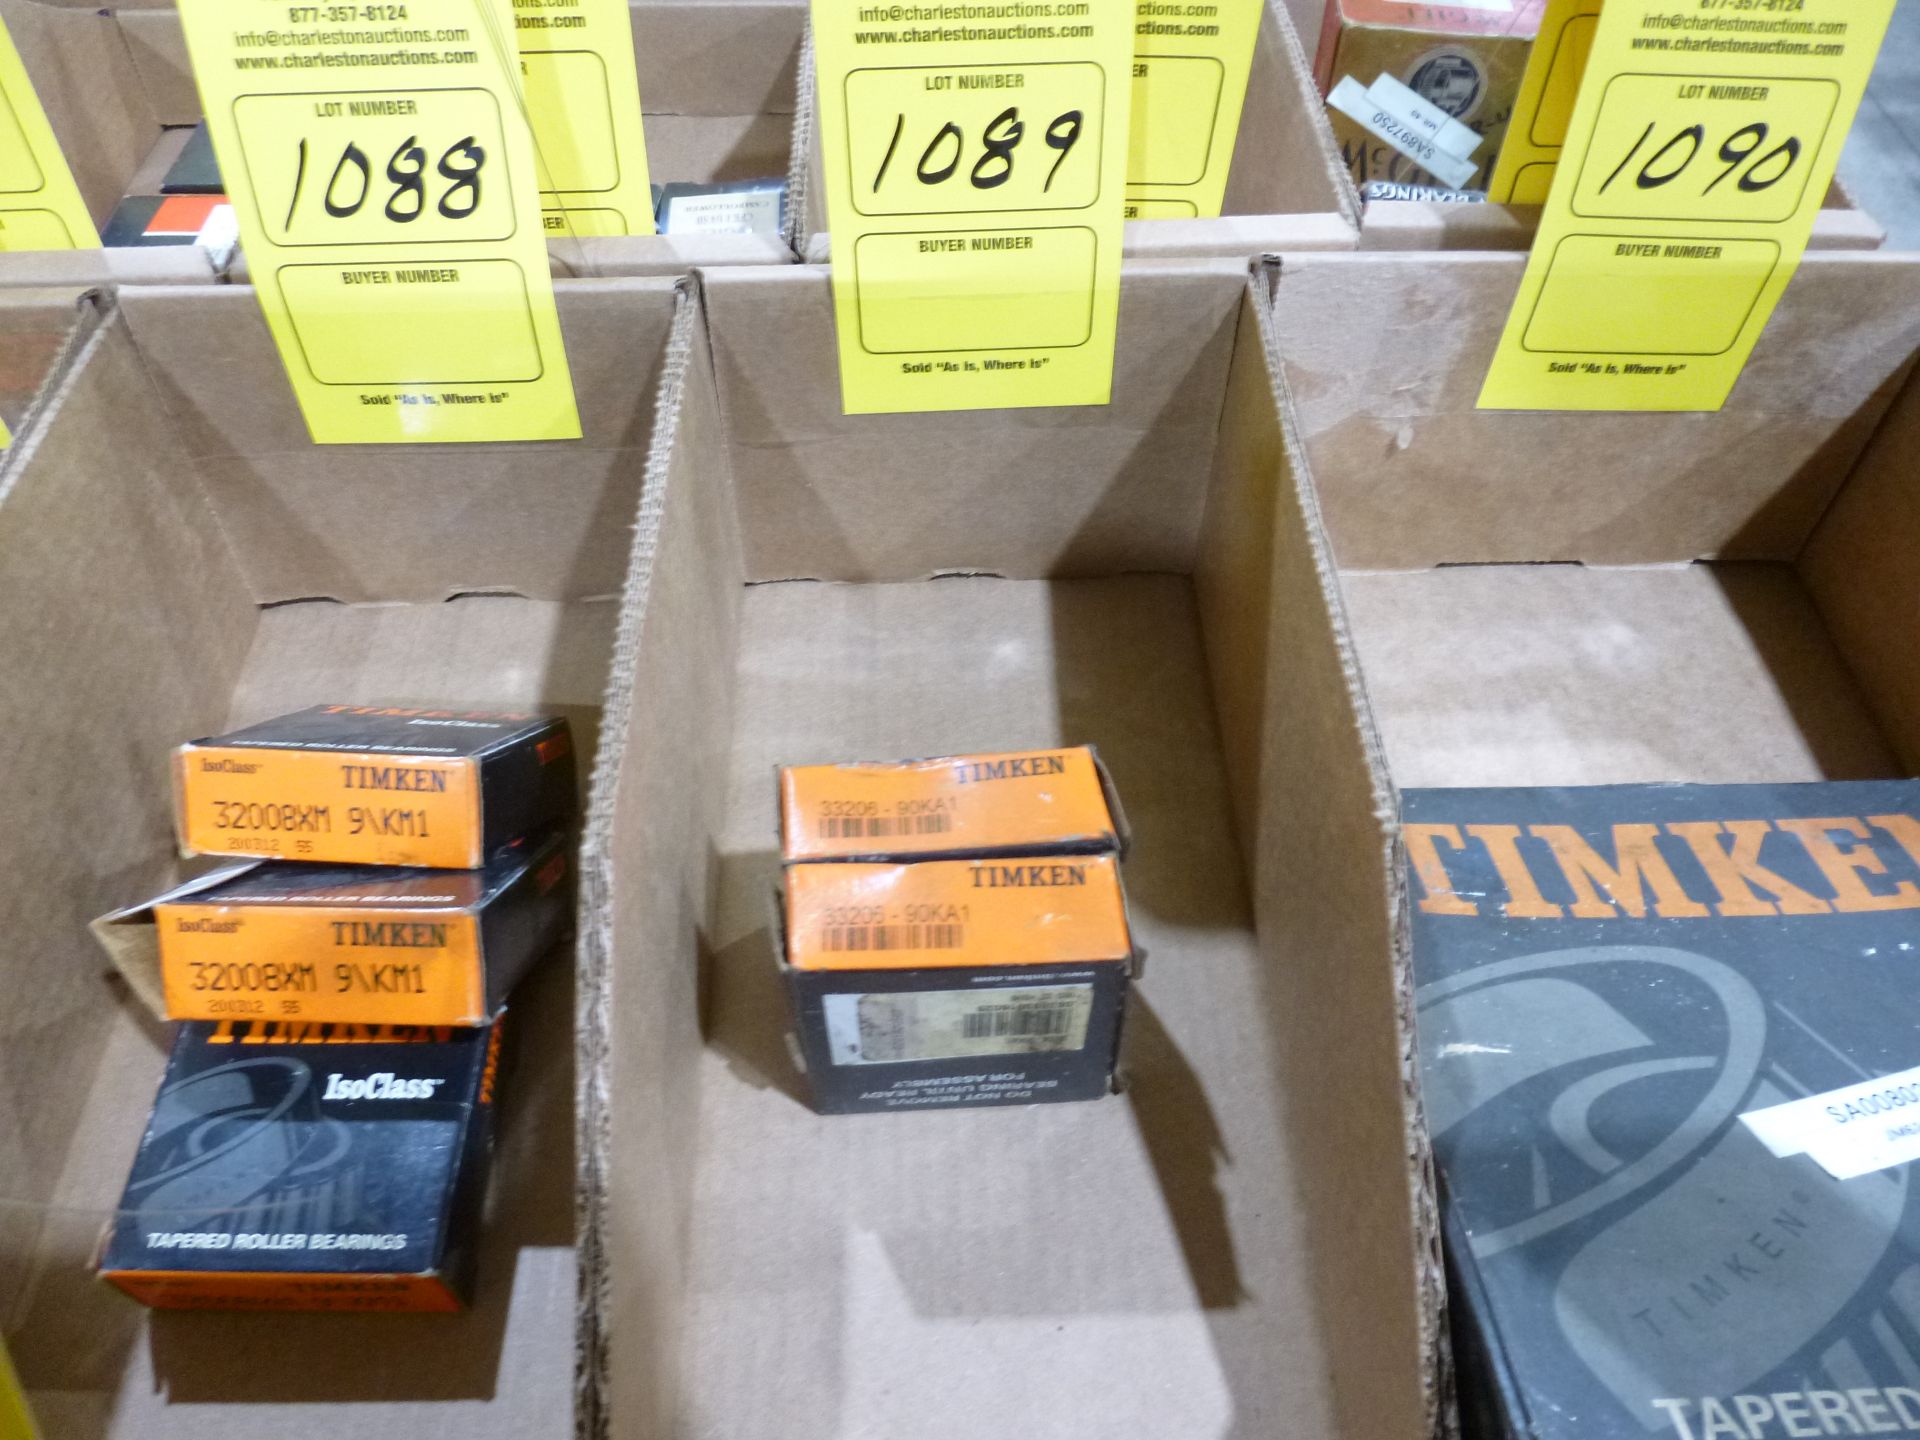 Qty 2 Timken bearing 33206-90KA1, as always with Brolyn LLC auctions, all lots can be picked up from